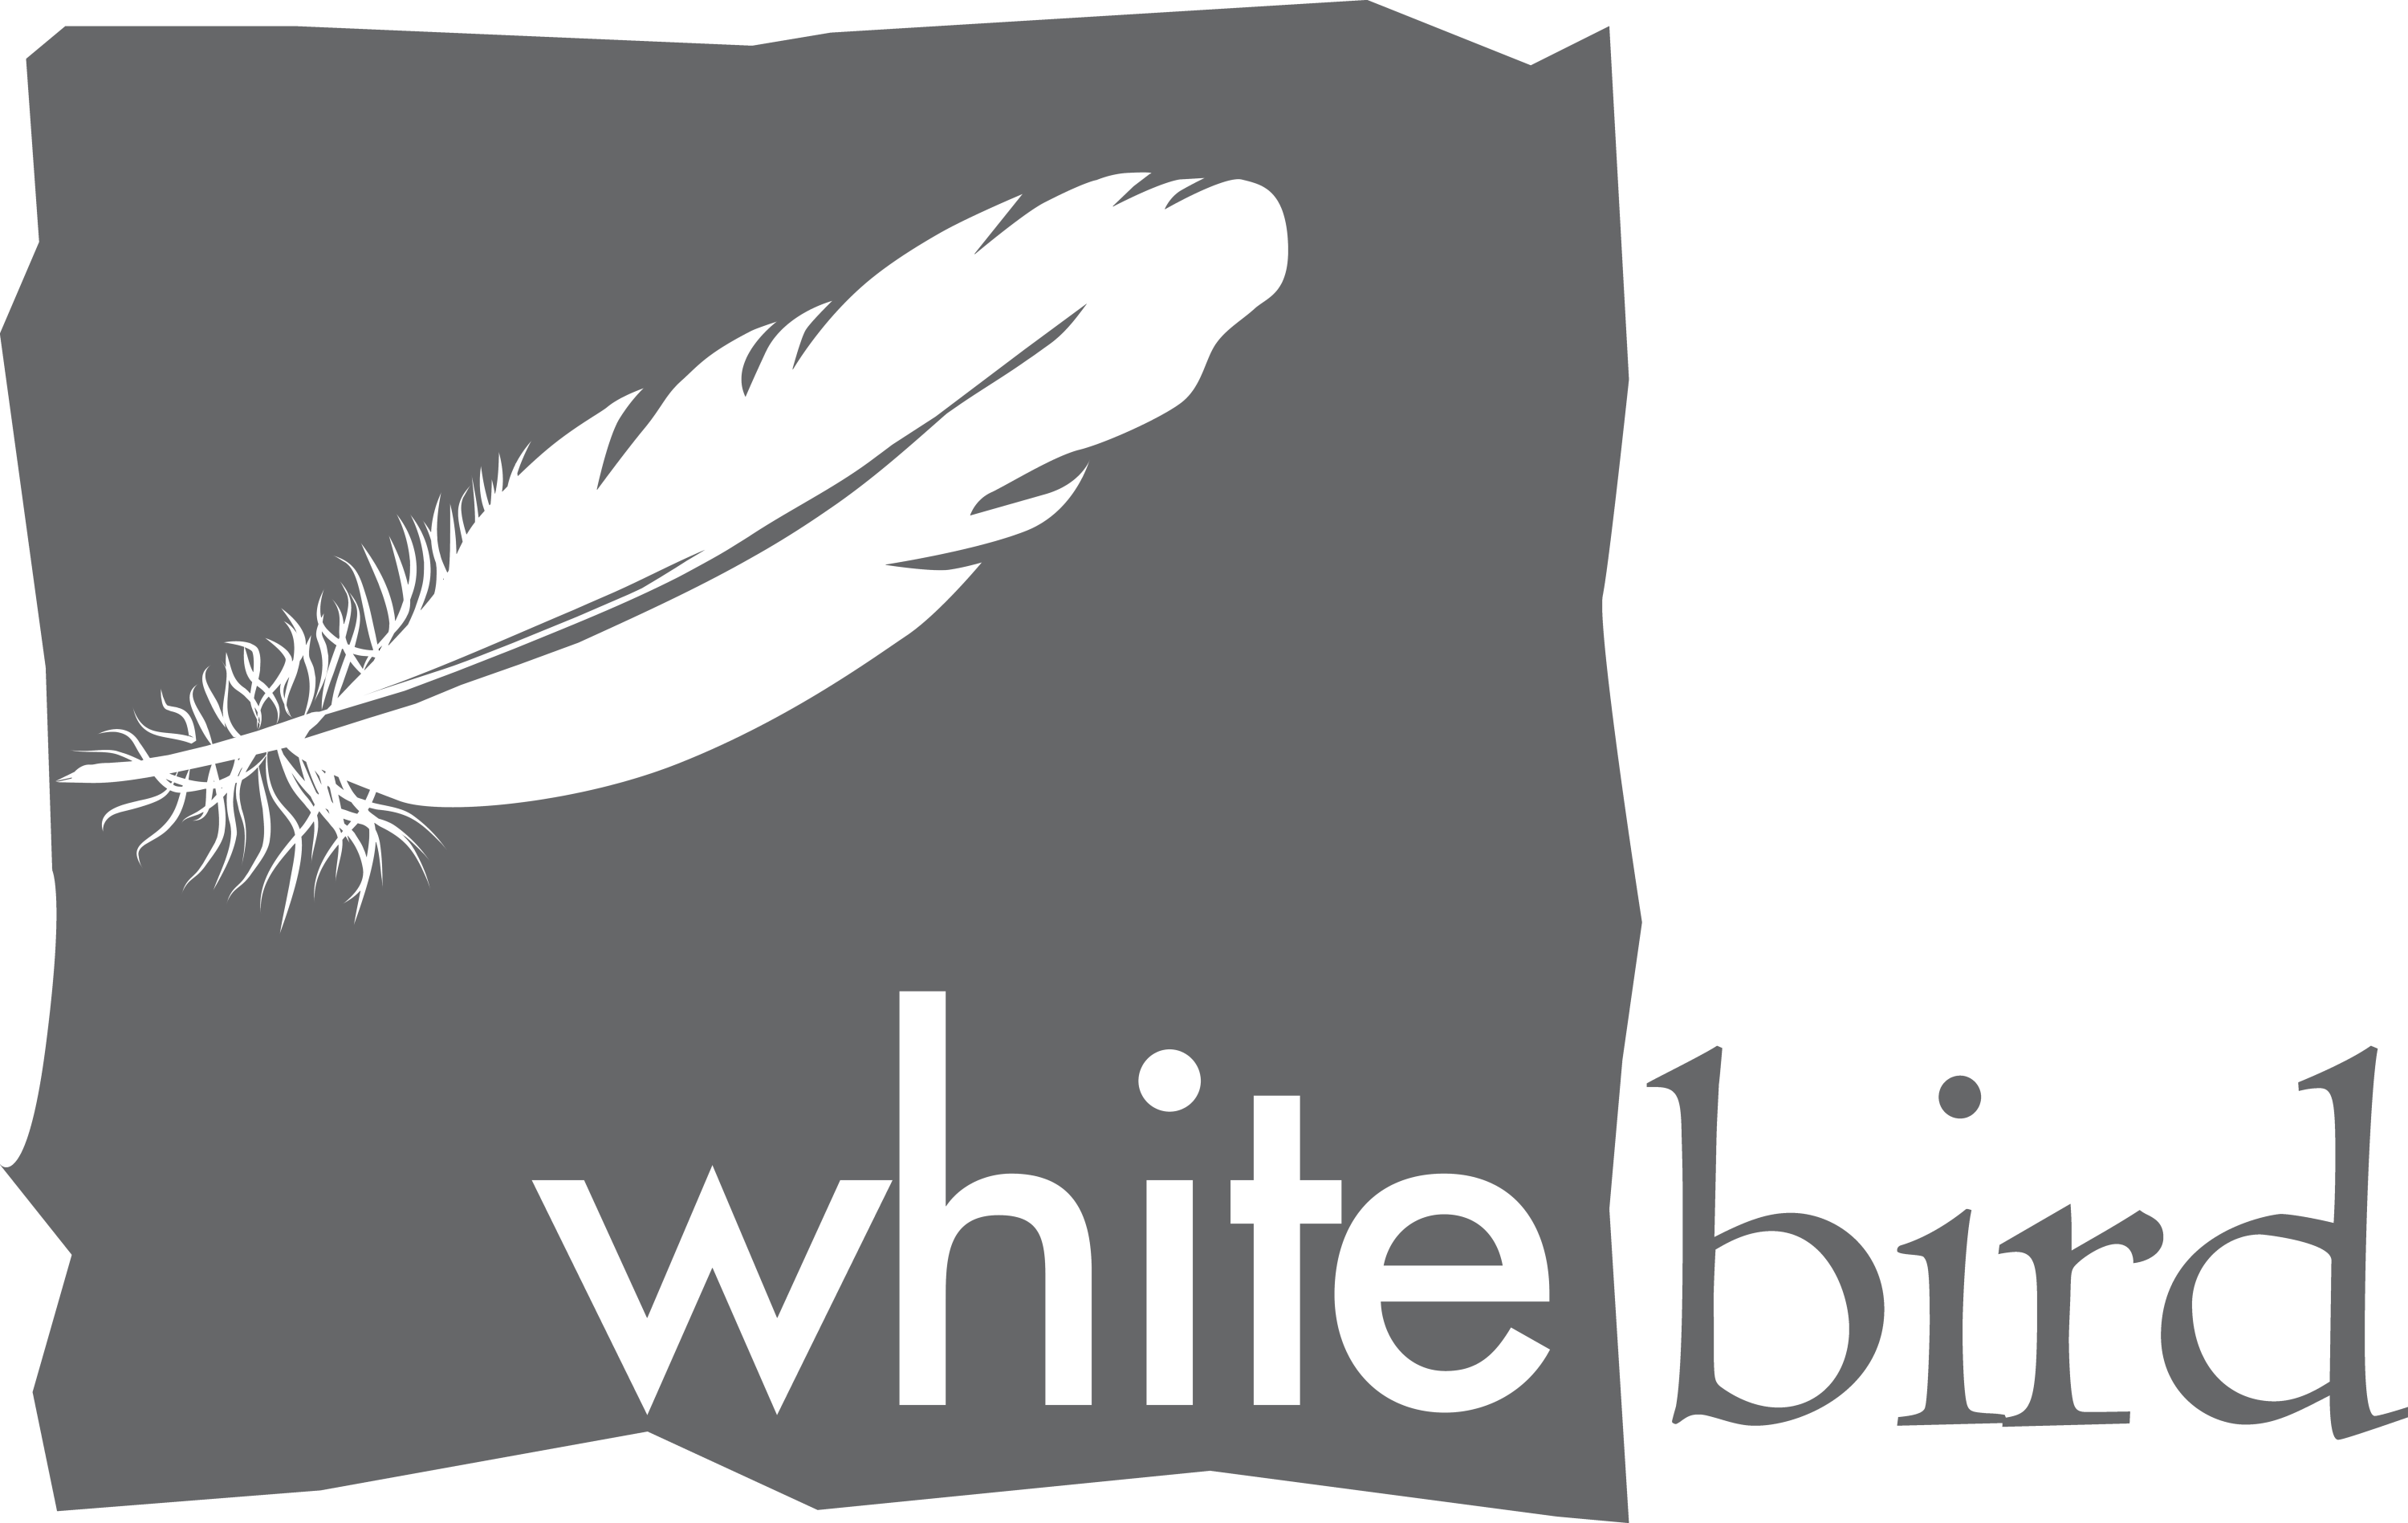 The words "white bird" appear beneath a white feather.